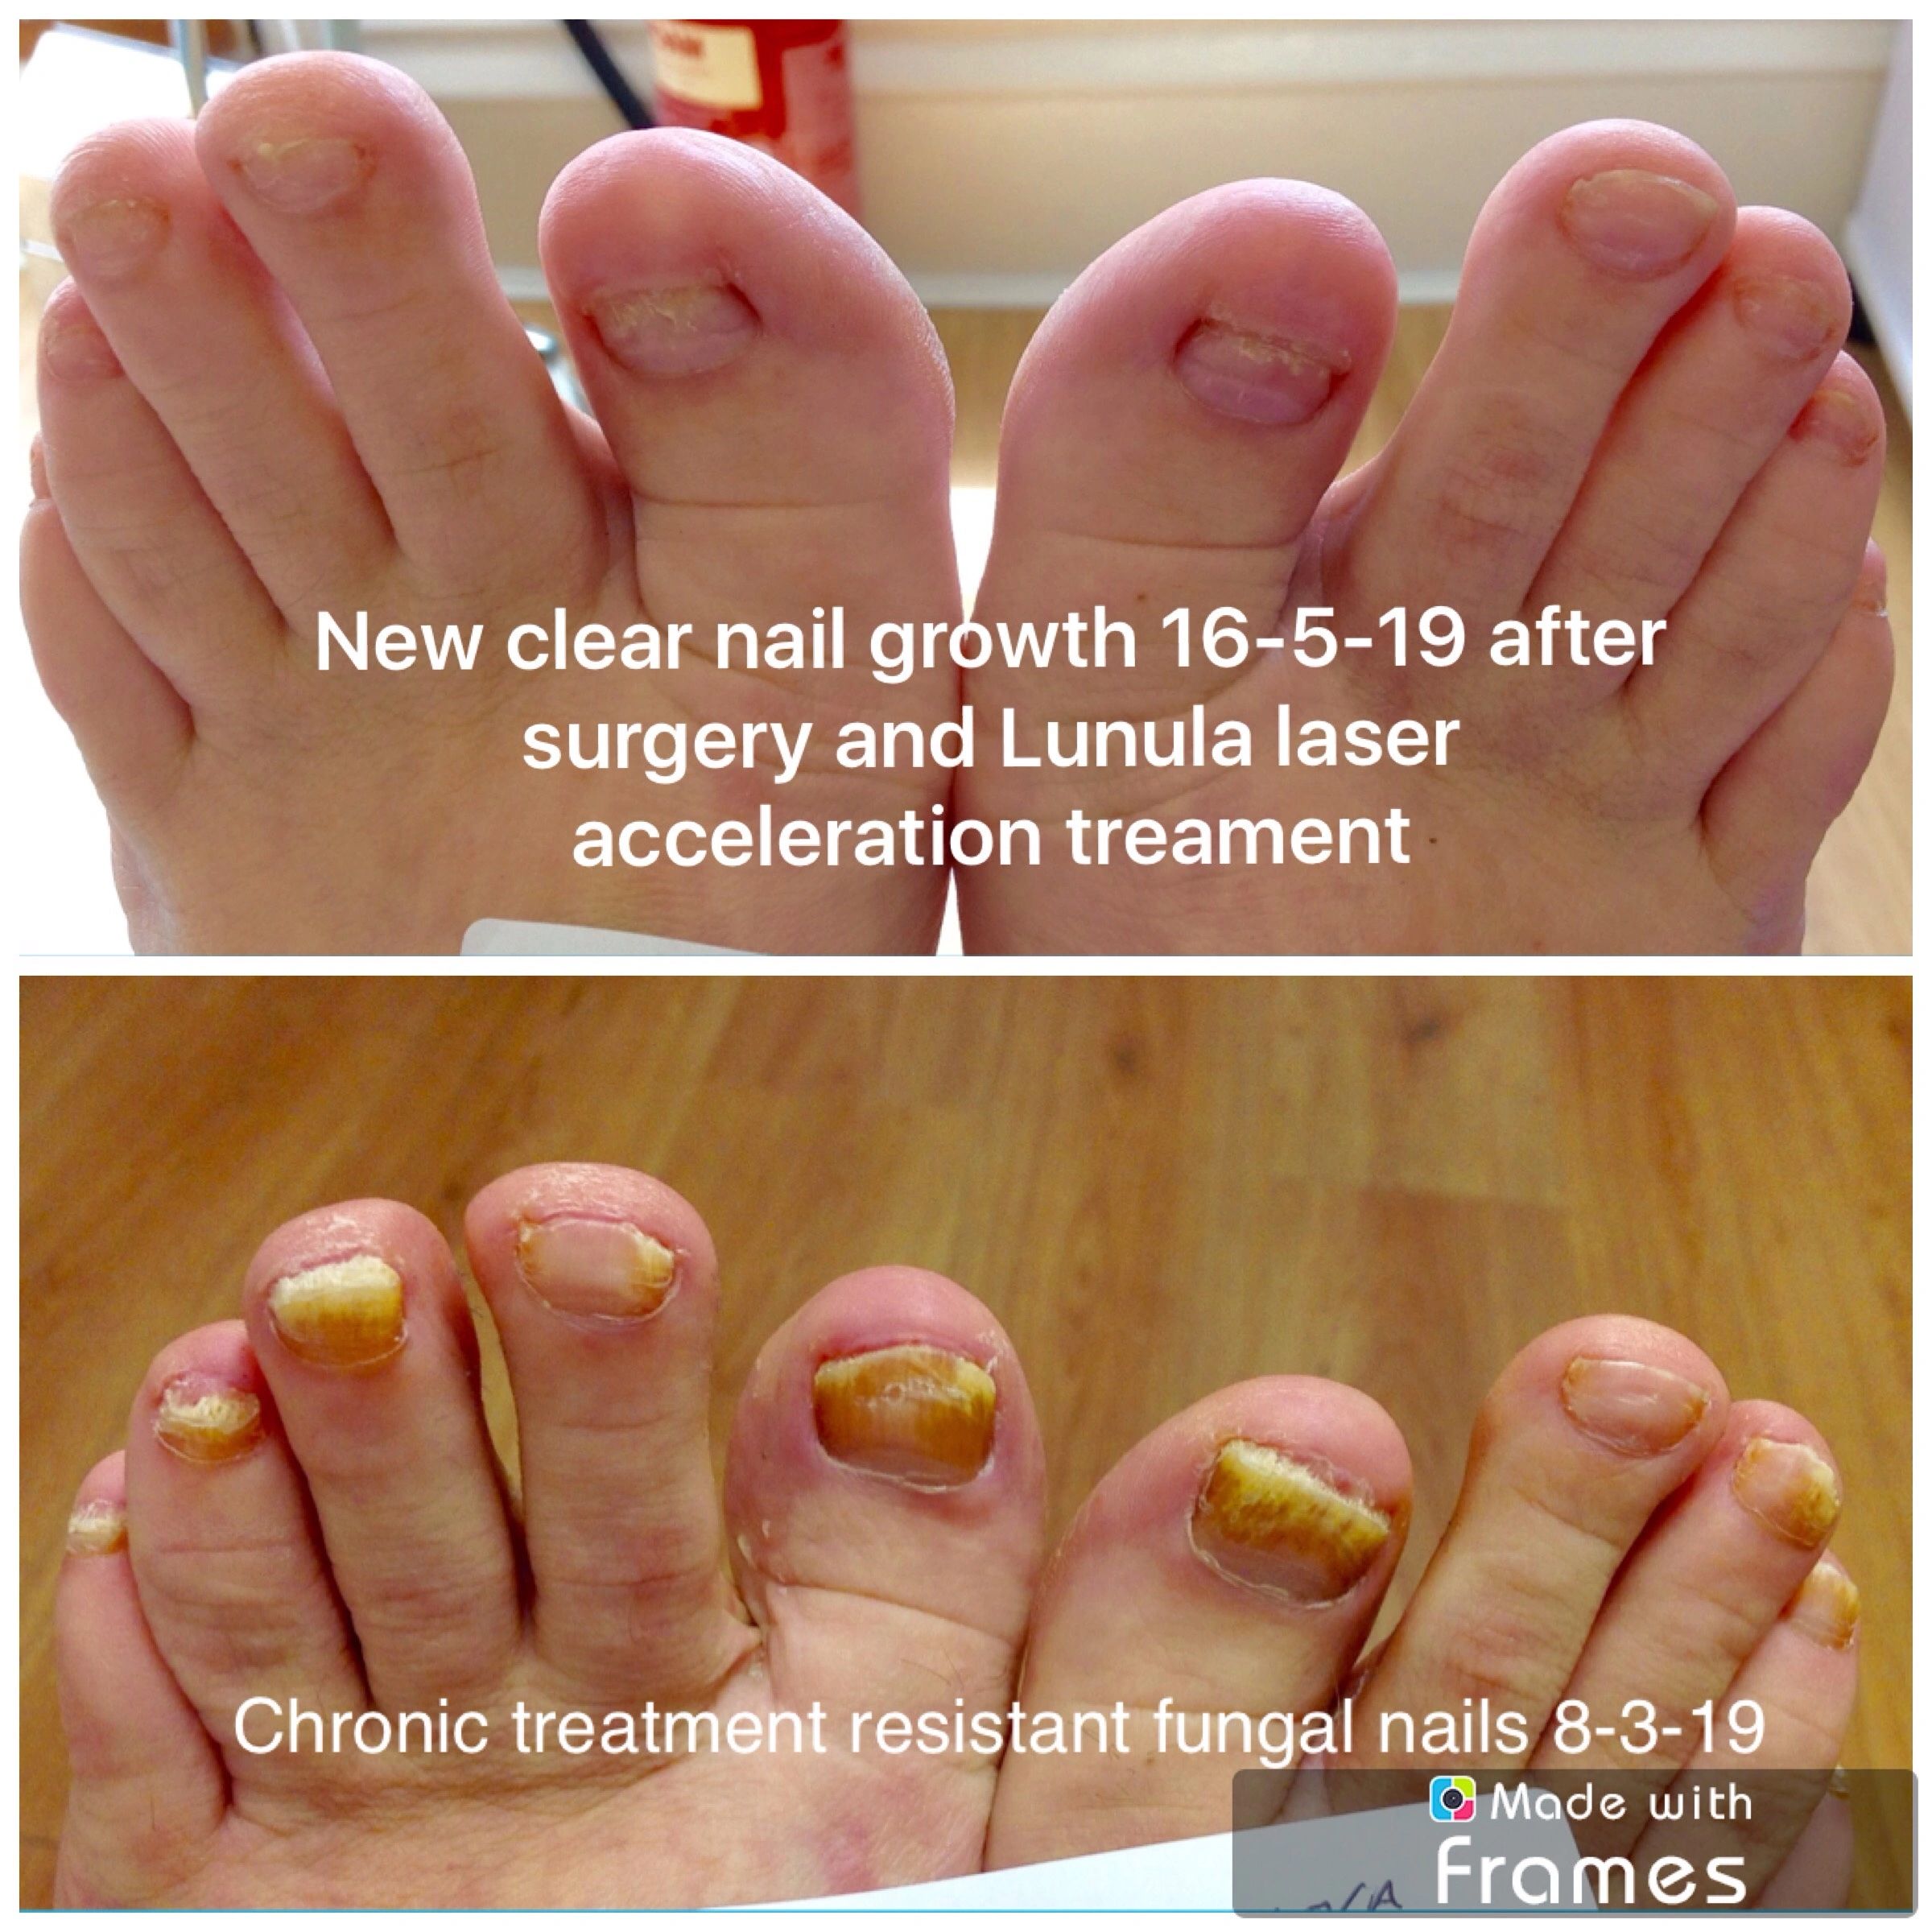 New Best Fungal Nail Treatments. A Tailored Approach.